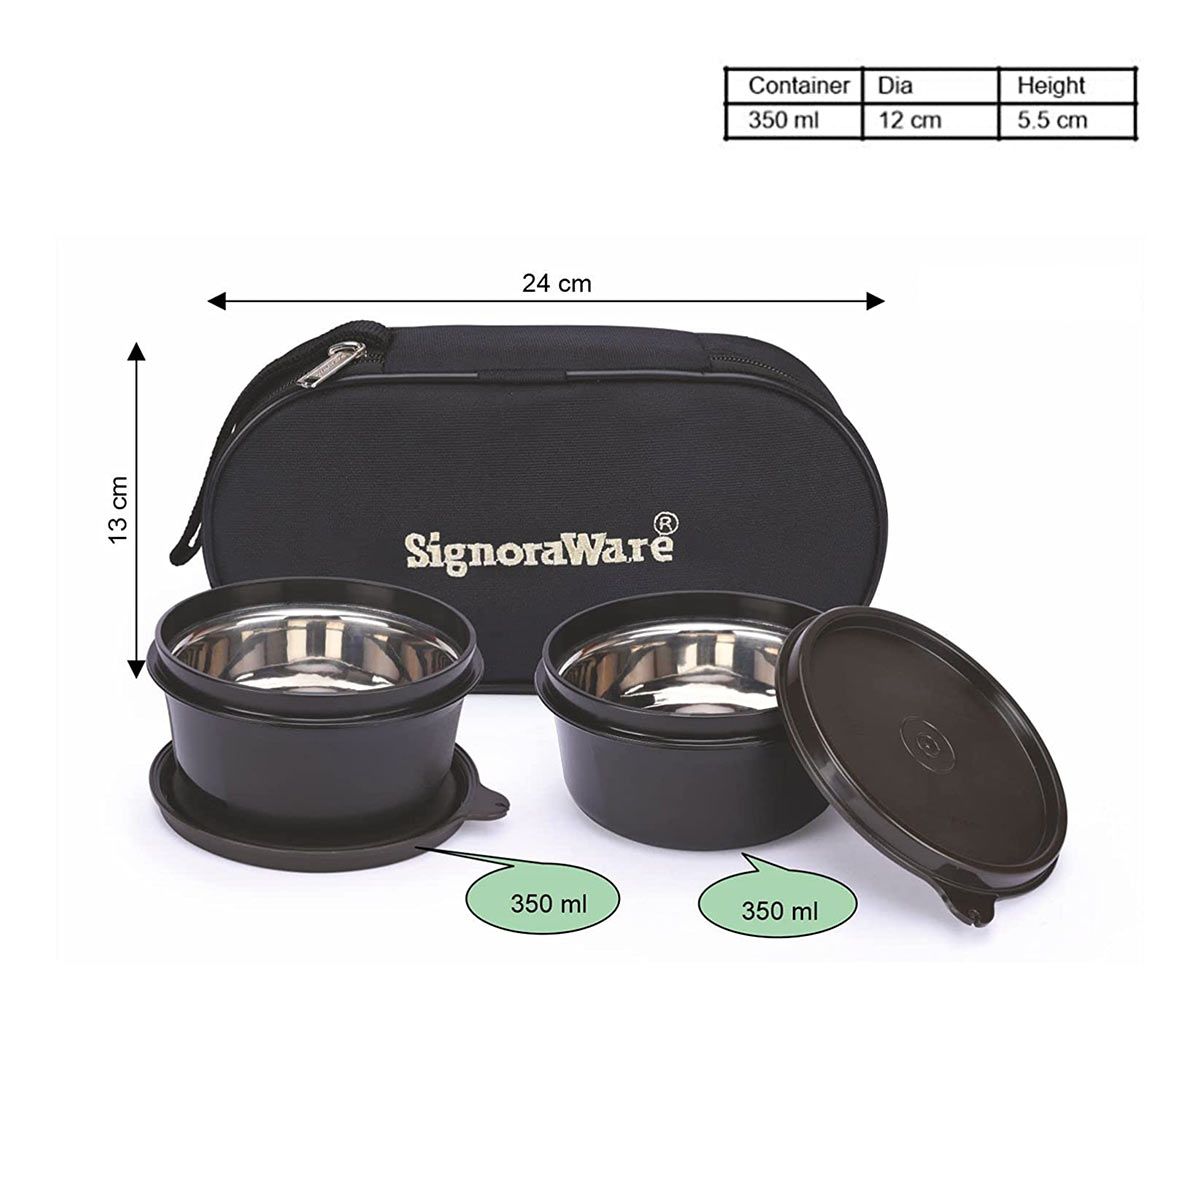 Signoraware Monarch Midday Microsafe Steel Stainless Steel Inner Lunch Box with Bag